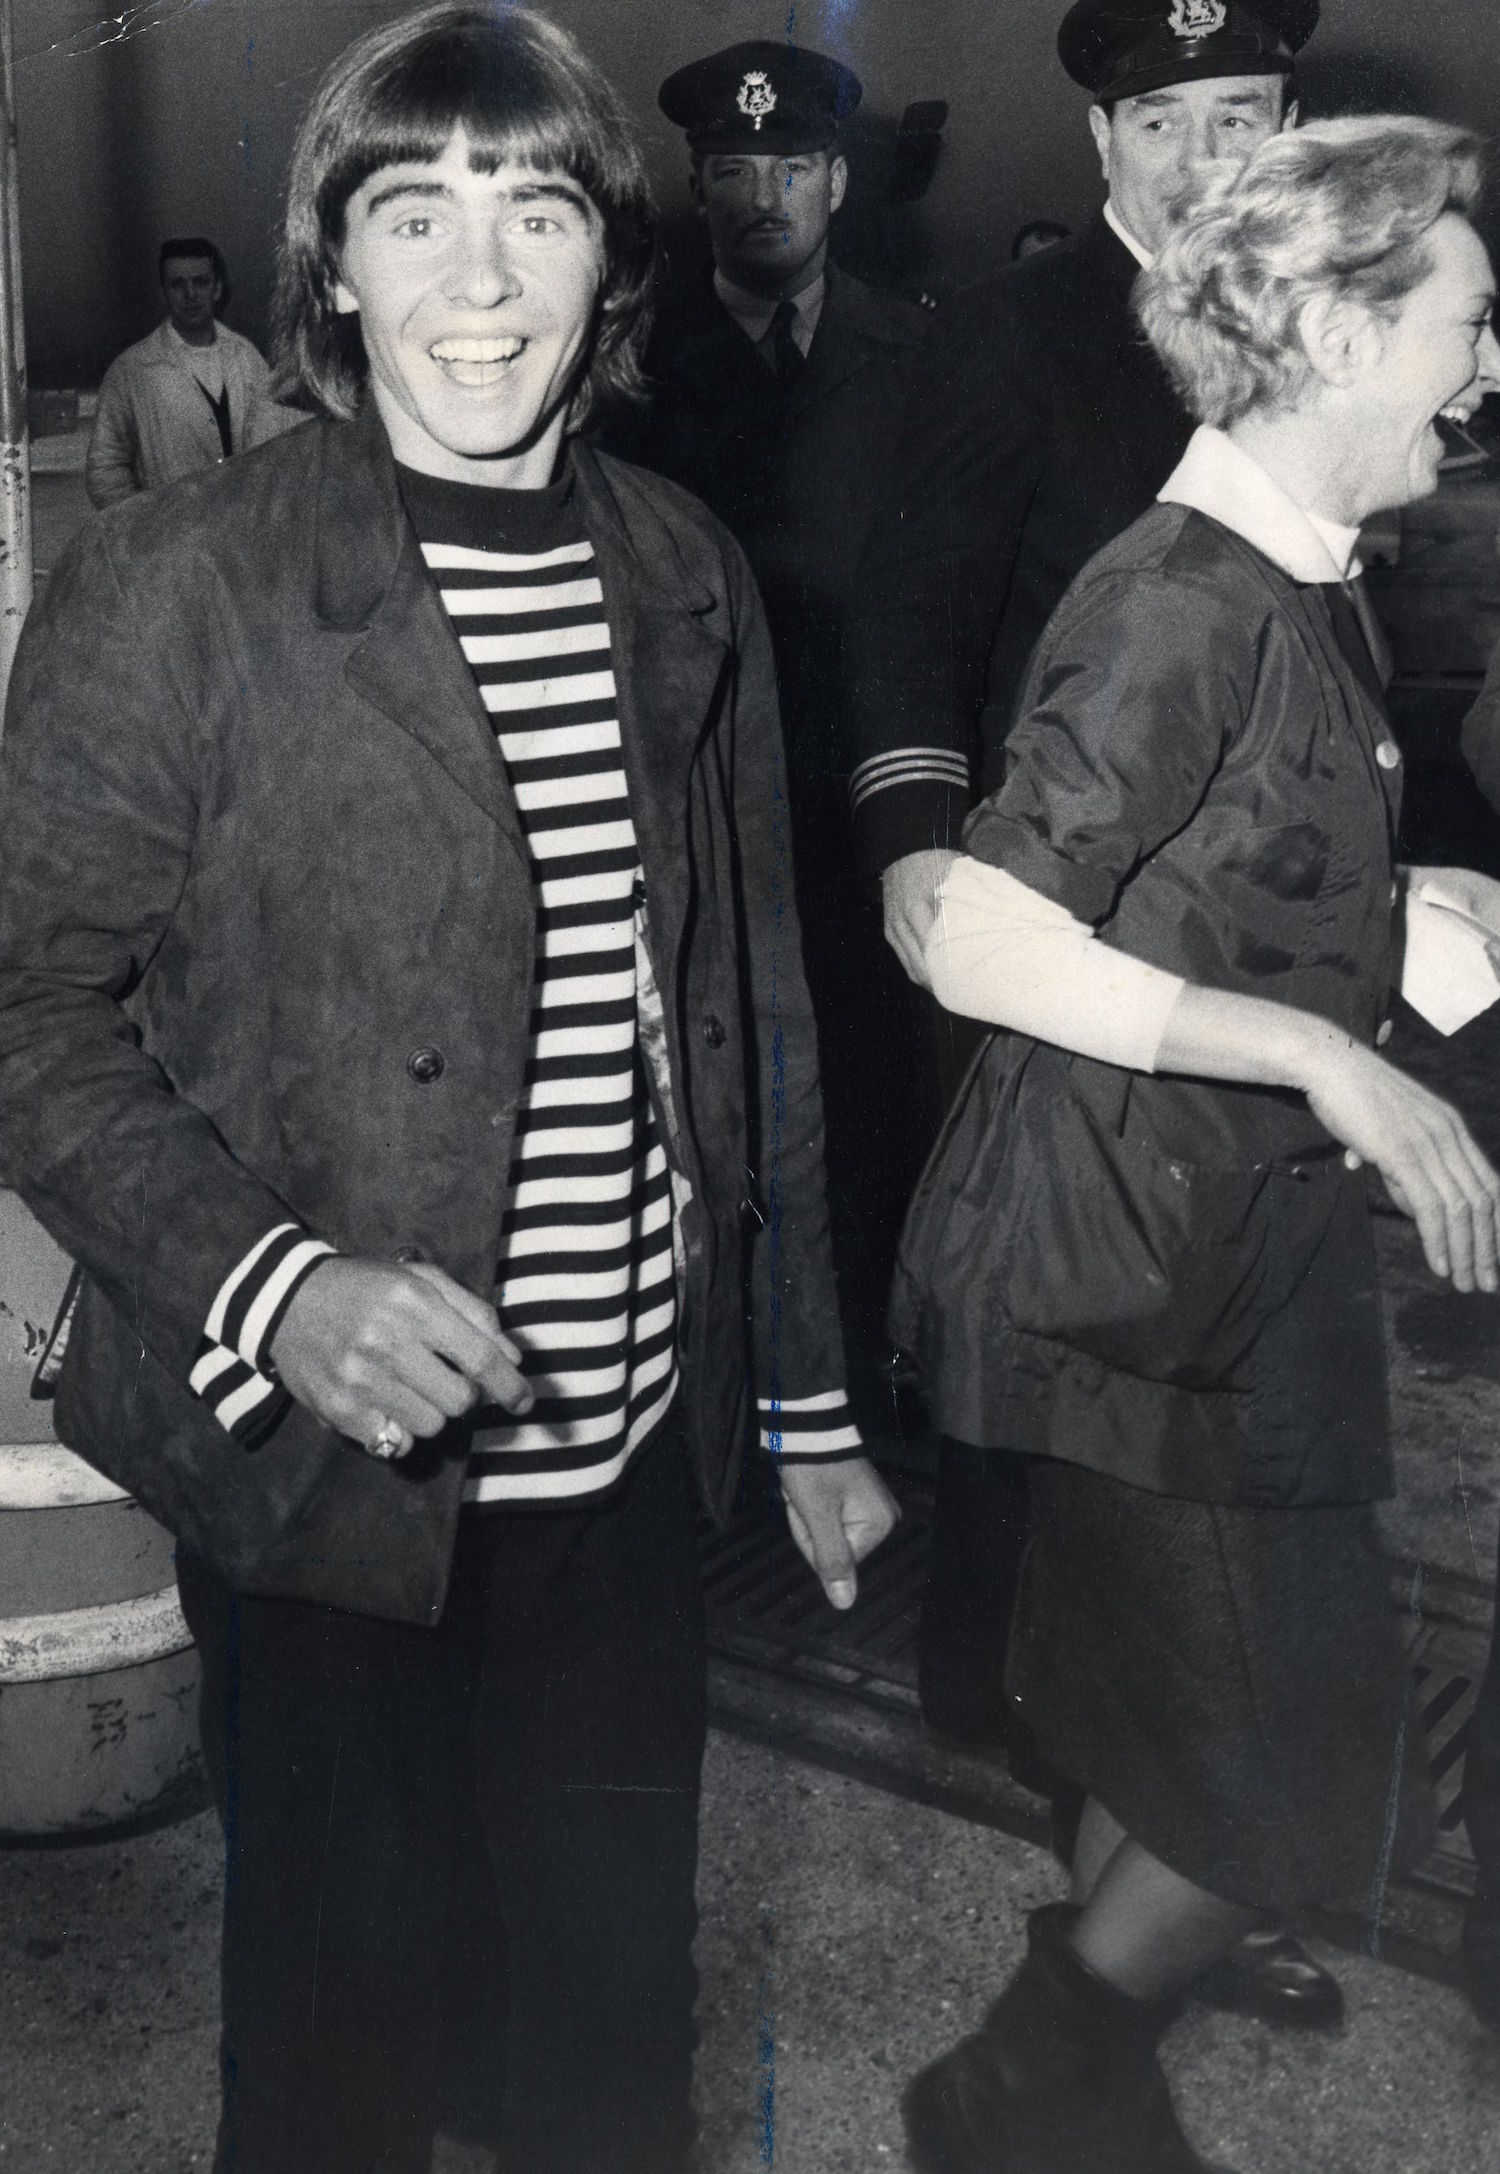 Davy Jones Of The Monkees At Heathrow Airport With A Fan. 